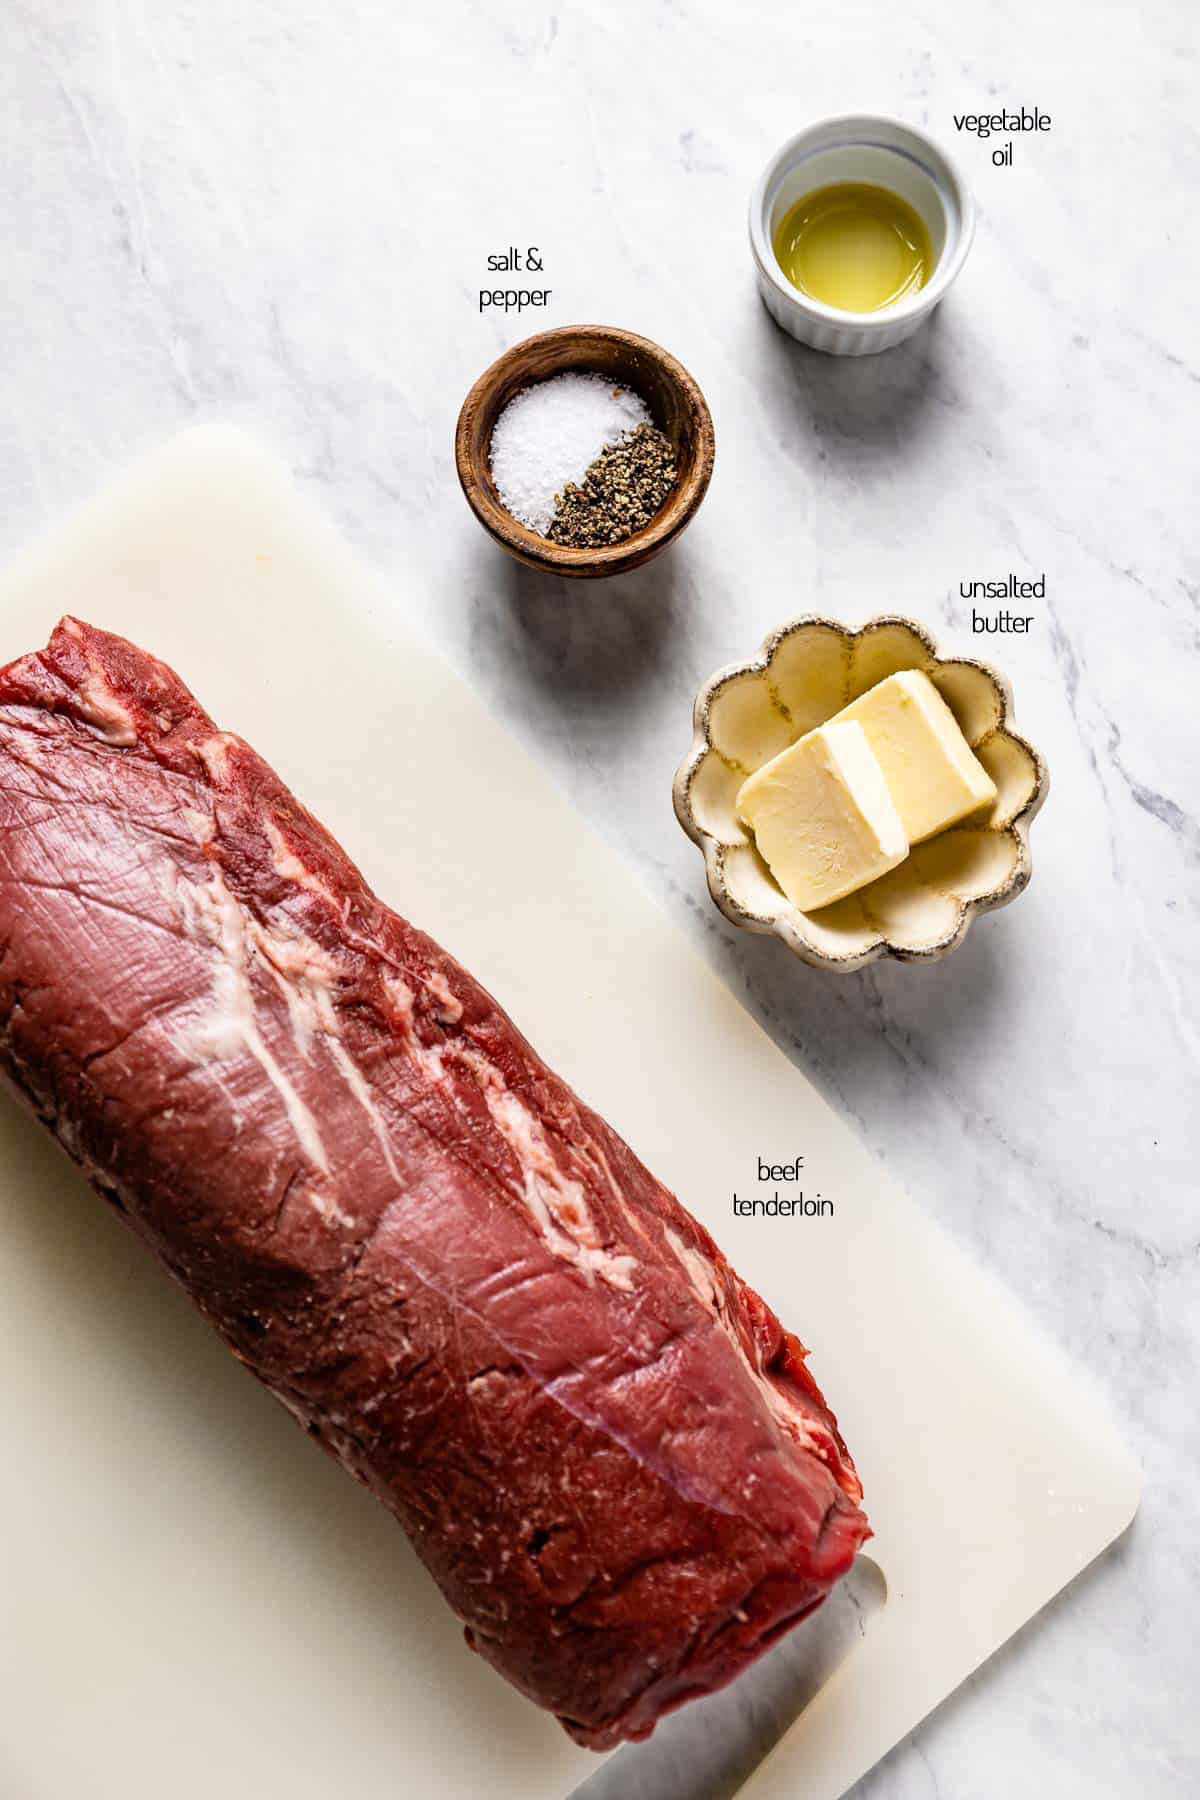 Ingredients including chateaubriand, butter and seasoning from the top view.